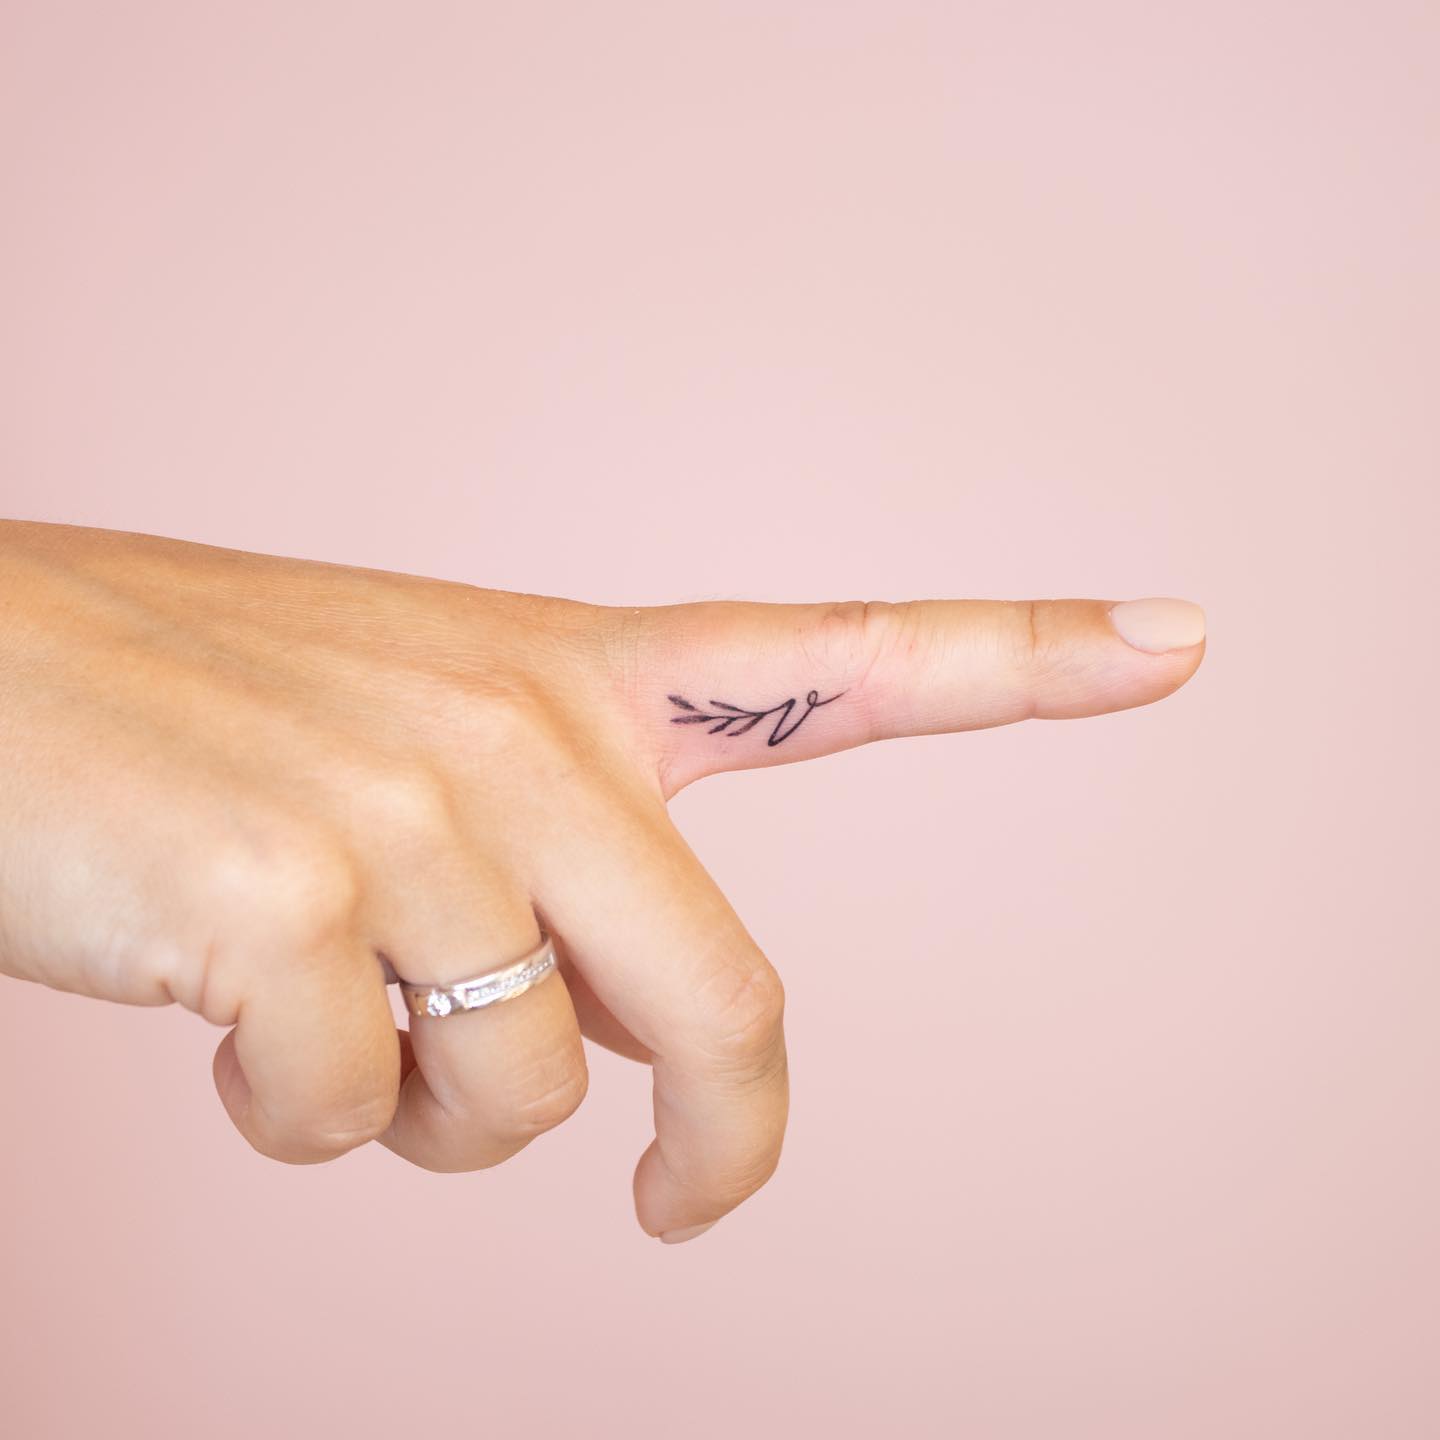 Tattoo Letters On Fingers